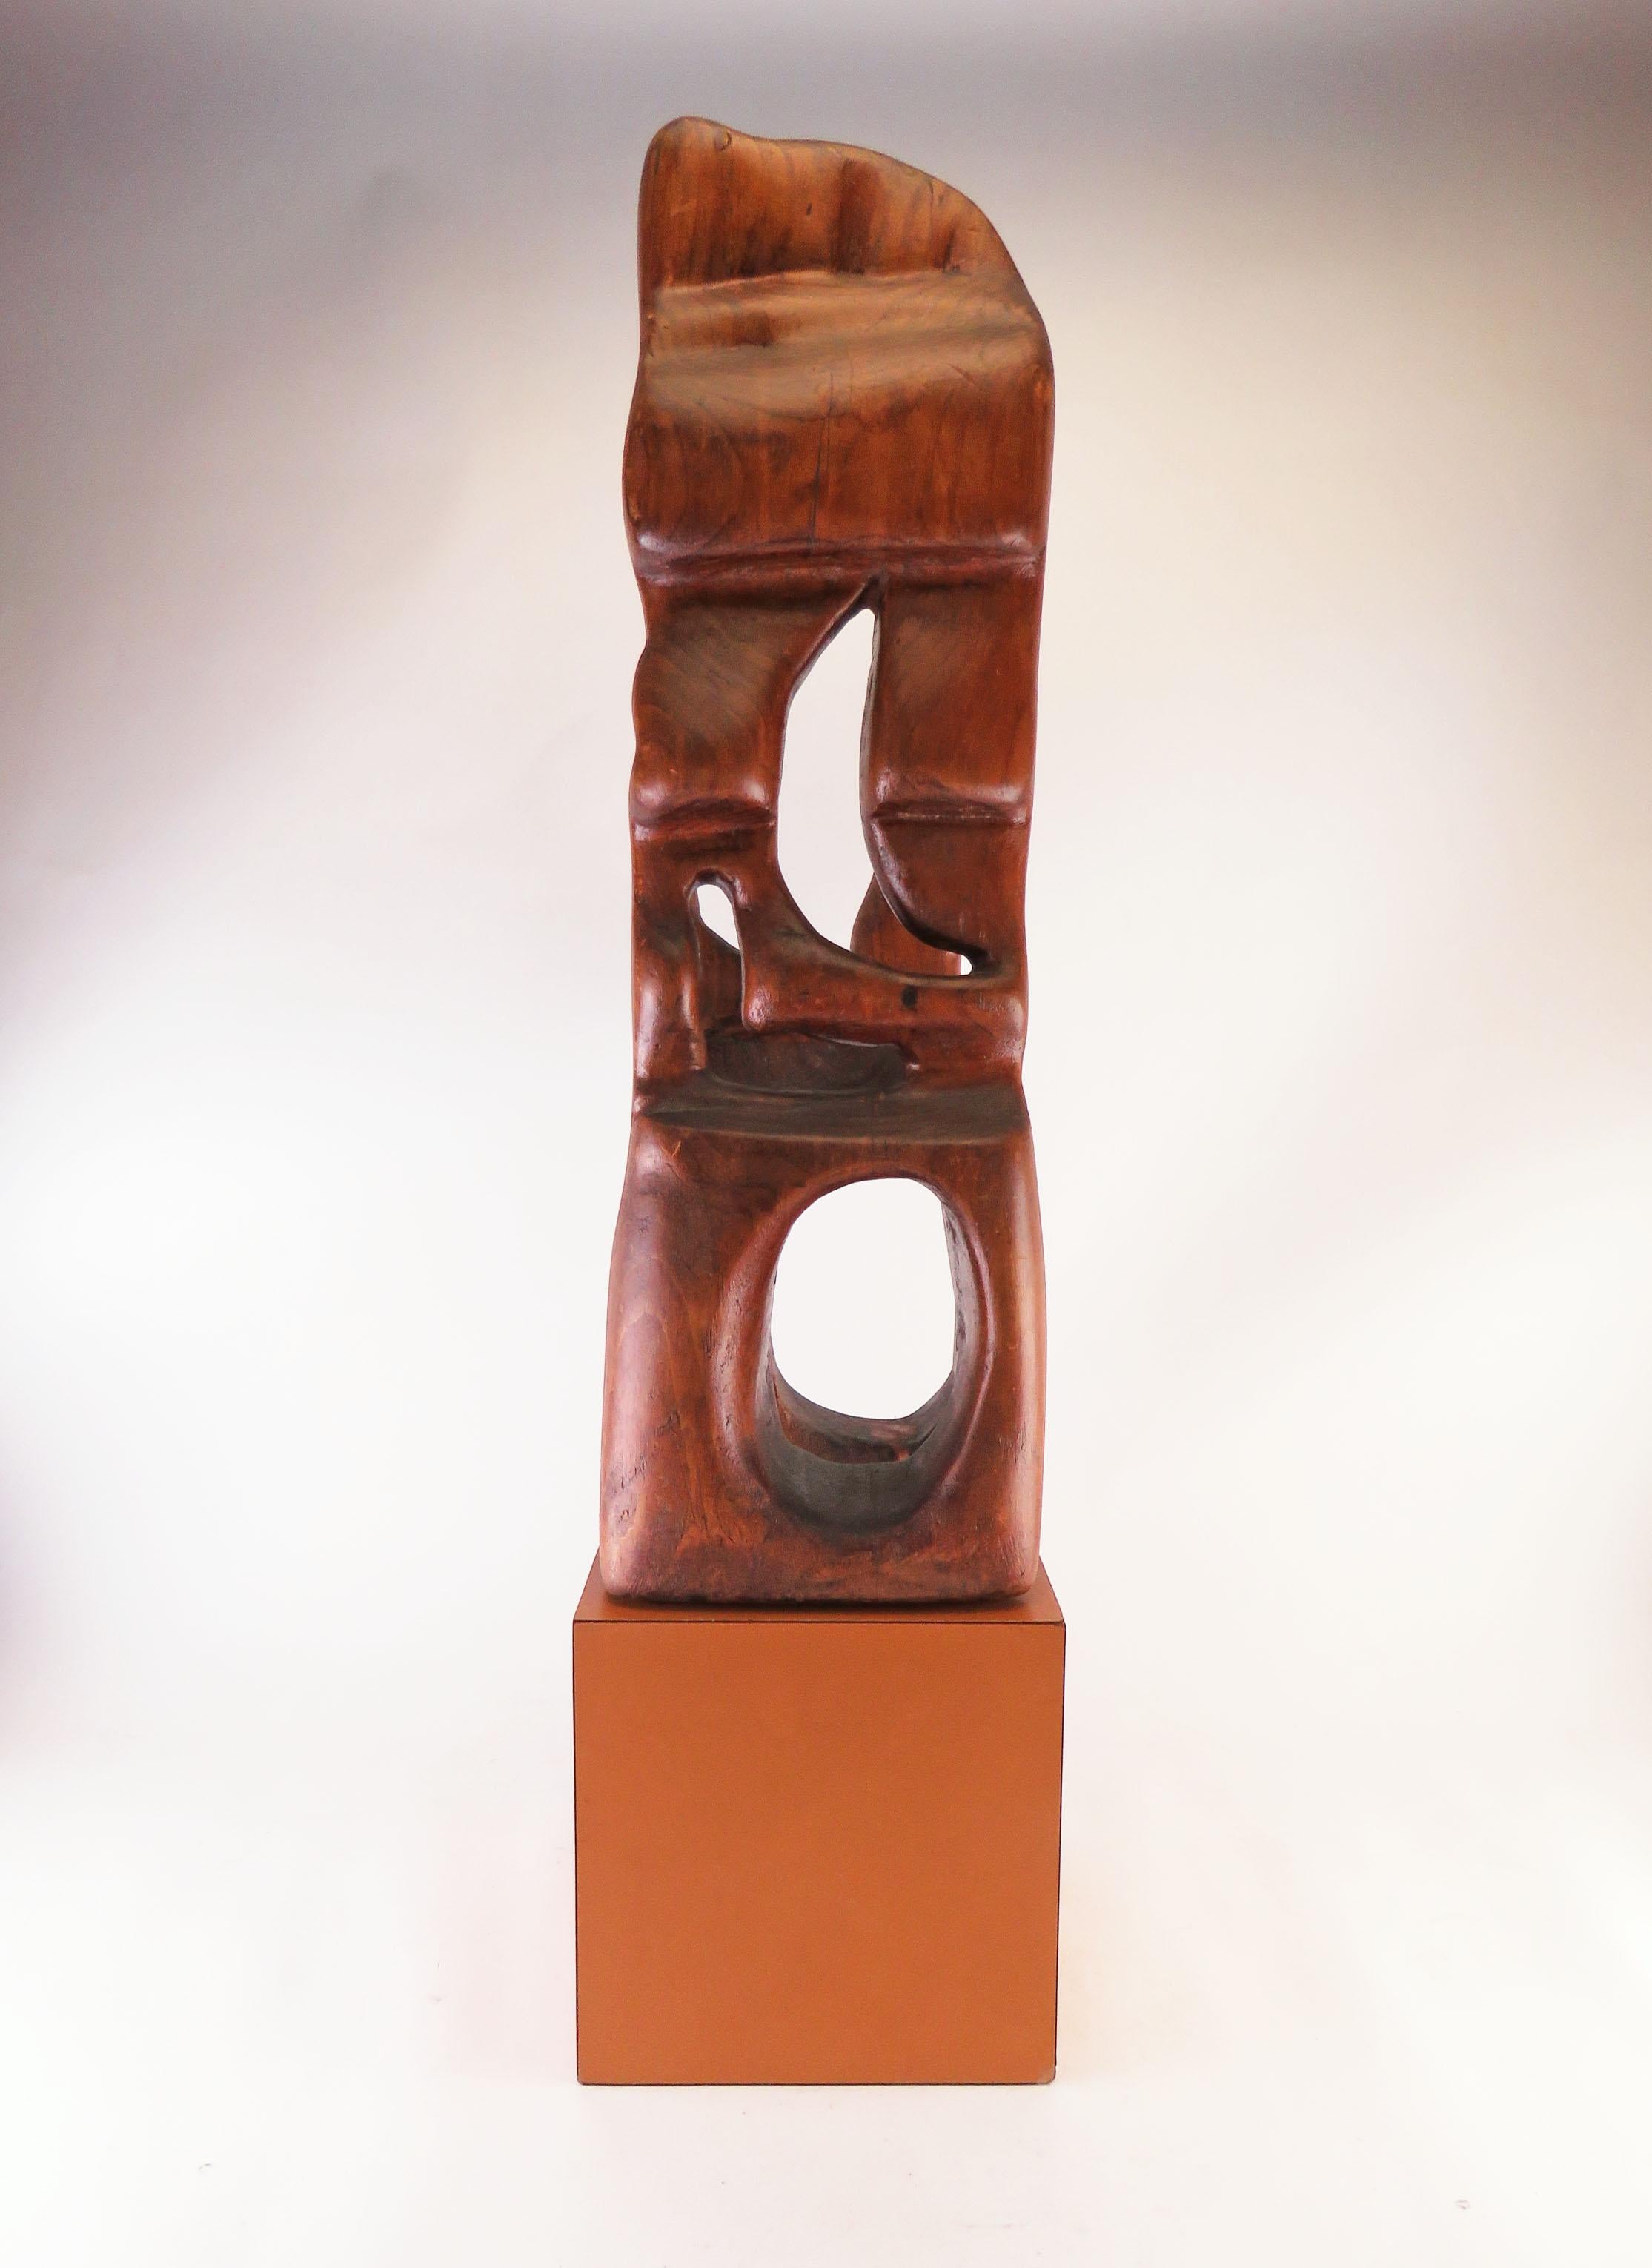 American Abstract Modernist Carved Wood Sculpture, circa 1960s